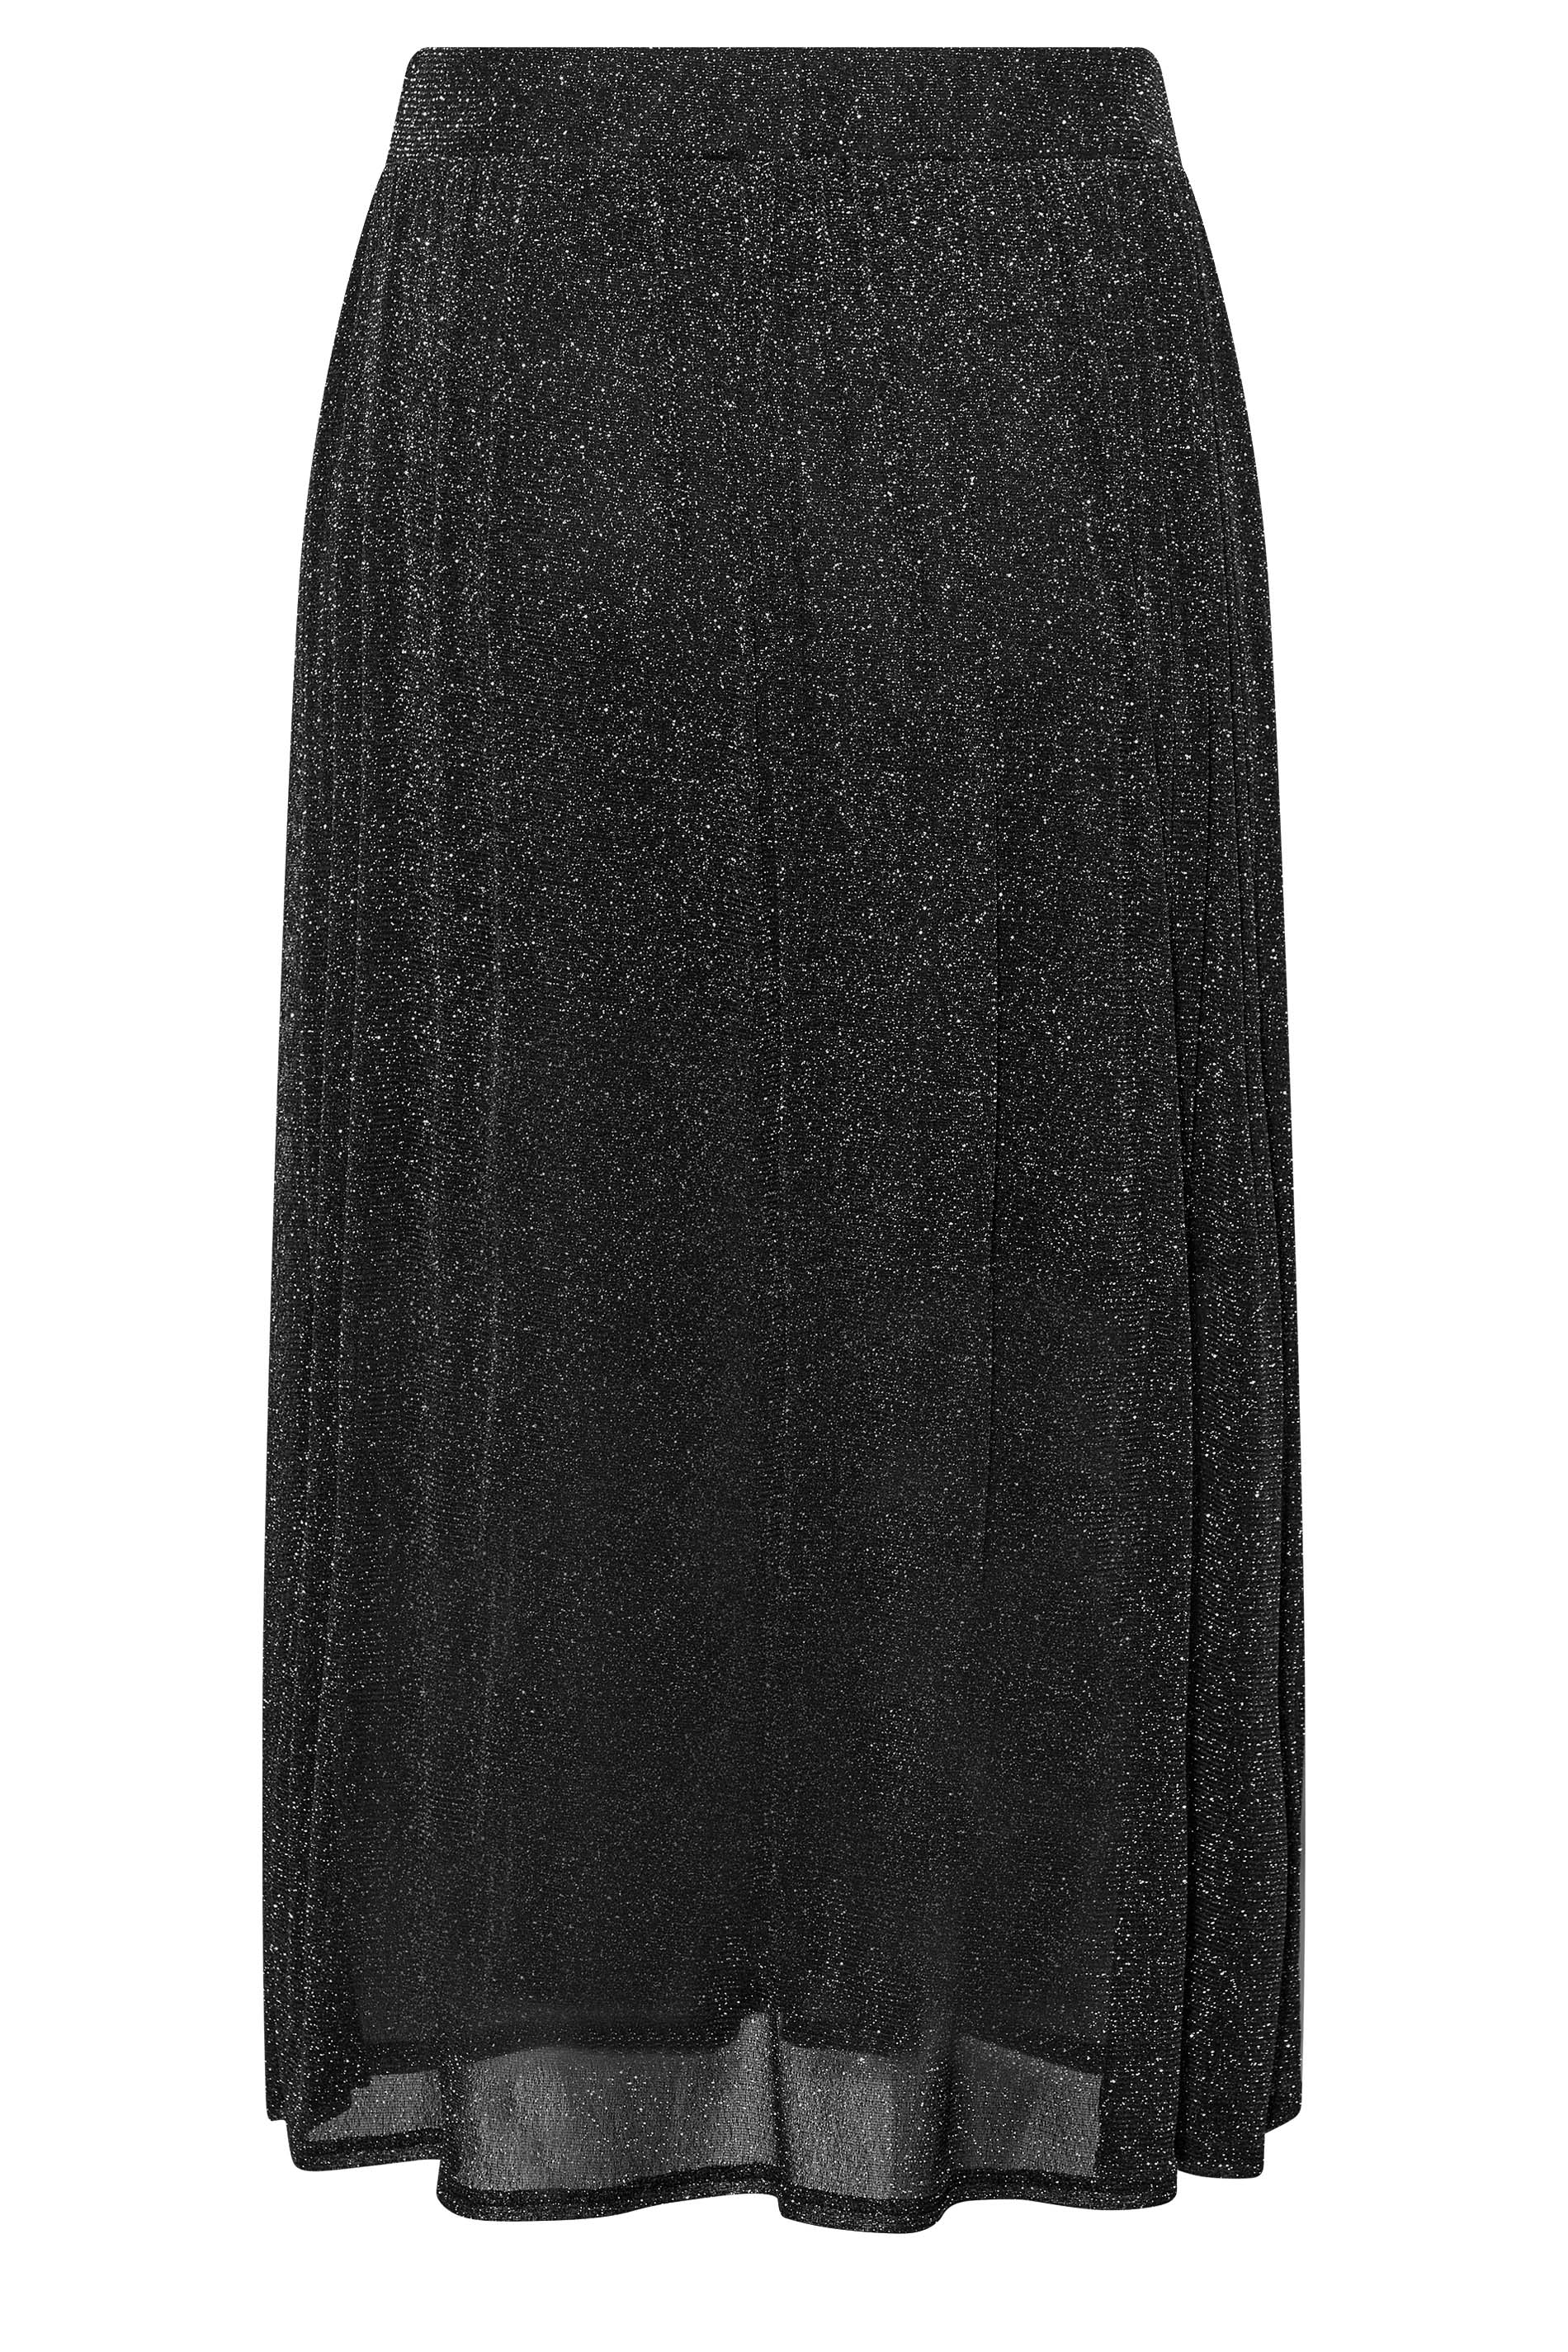 LIMITED COLLECTION Plus Size Black Glitter Midaxi Skirt | Yours Clothing